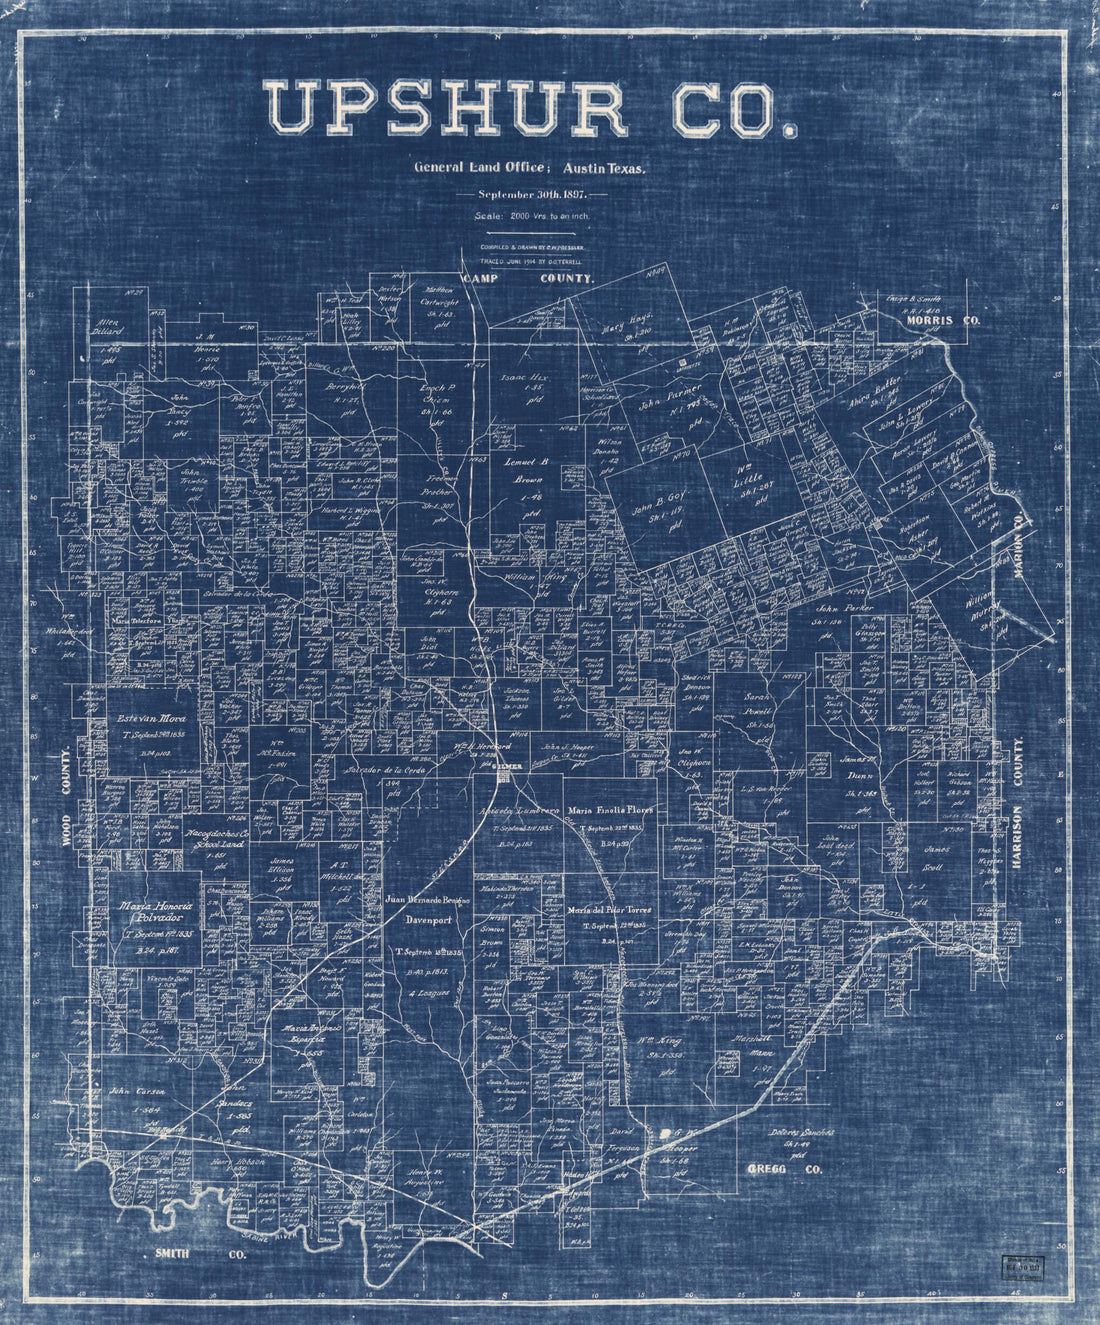 This old map of Upshur Co. (Upshur County, Texas) from 1897 was created by Chas. W. Pressler,  Texas. General Land Office in 1897